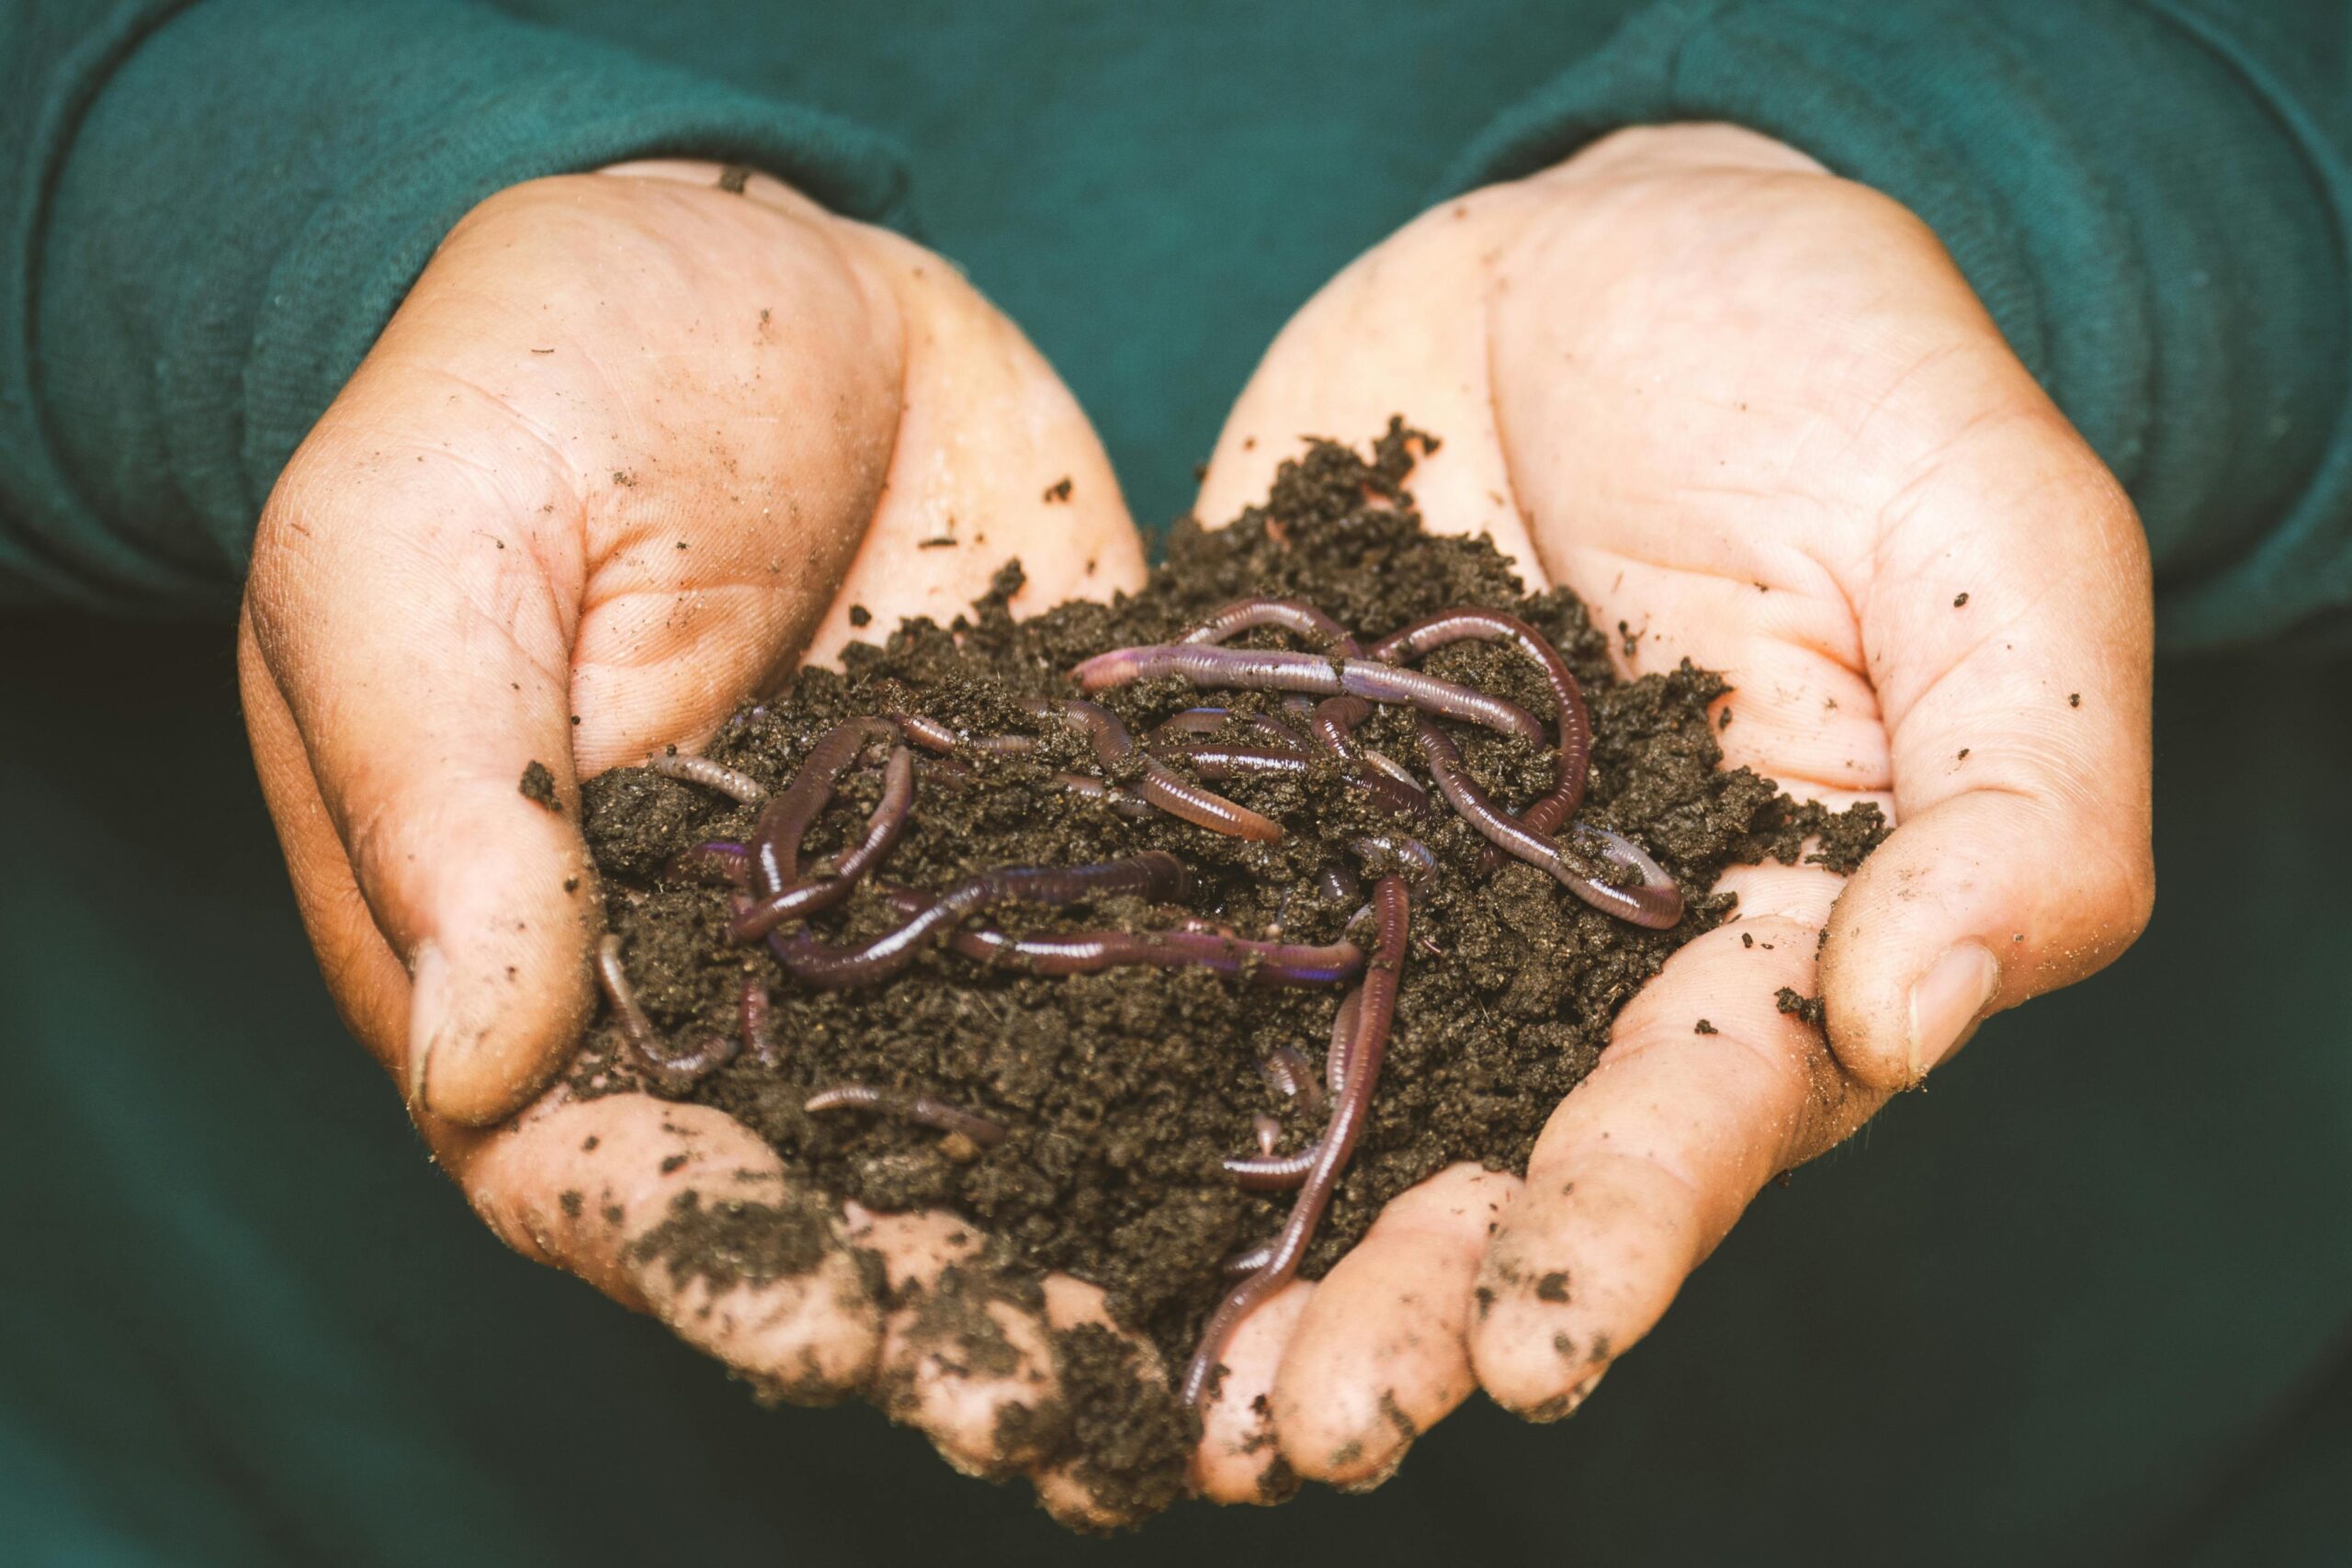 two hands holding dirt with worms